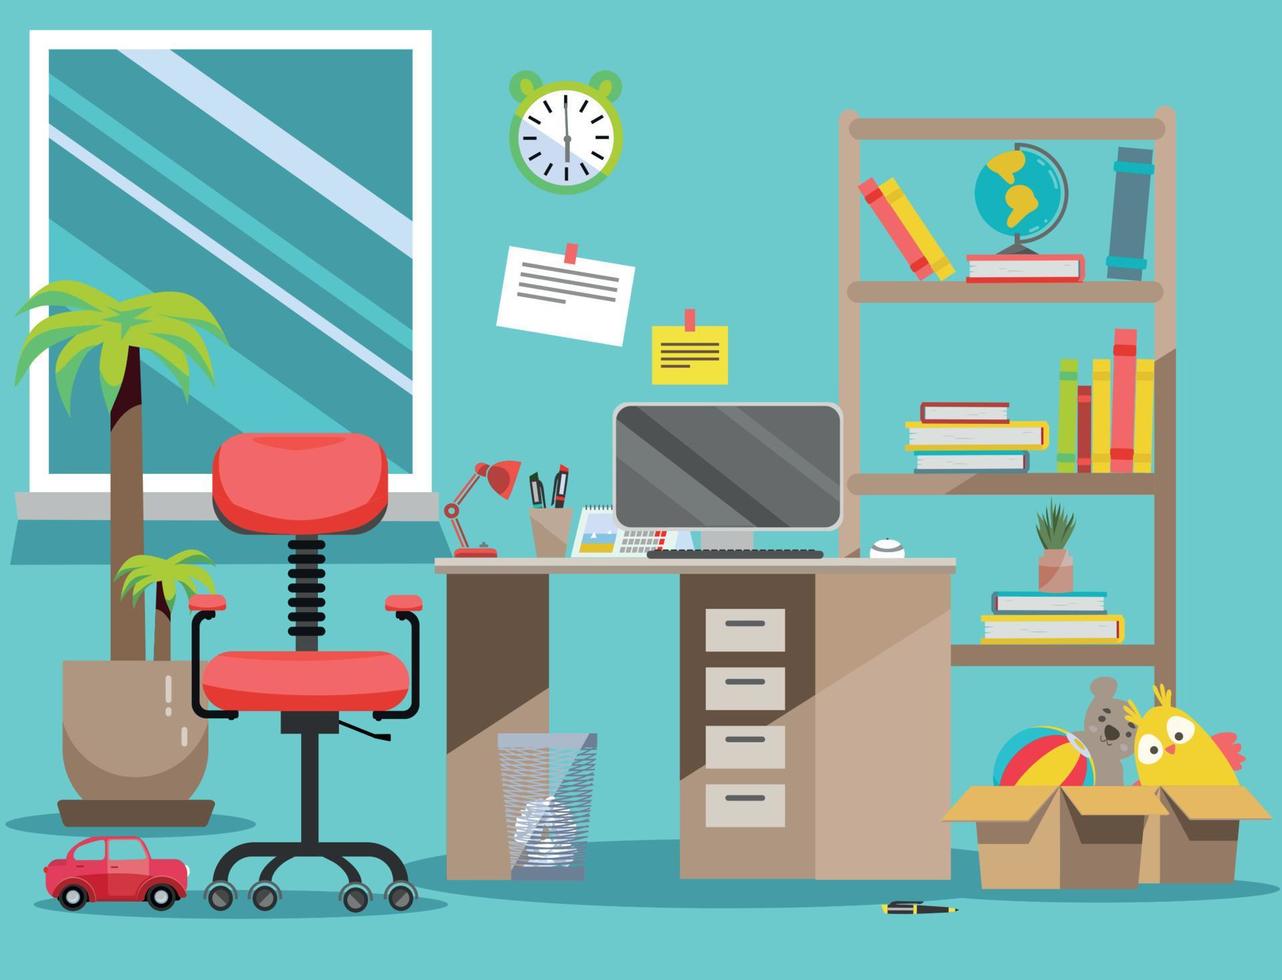 Interior nursery. Boy's room with table, computer, bookshelf,toys in boxes. Flat cartoon vector illustration.Cozy interior of children's room with toys, furniture, window. Teenager room with workplace